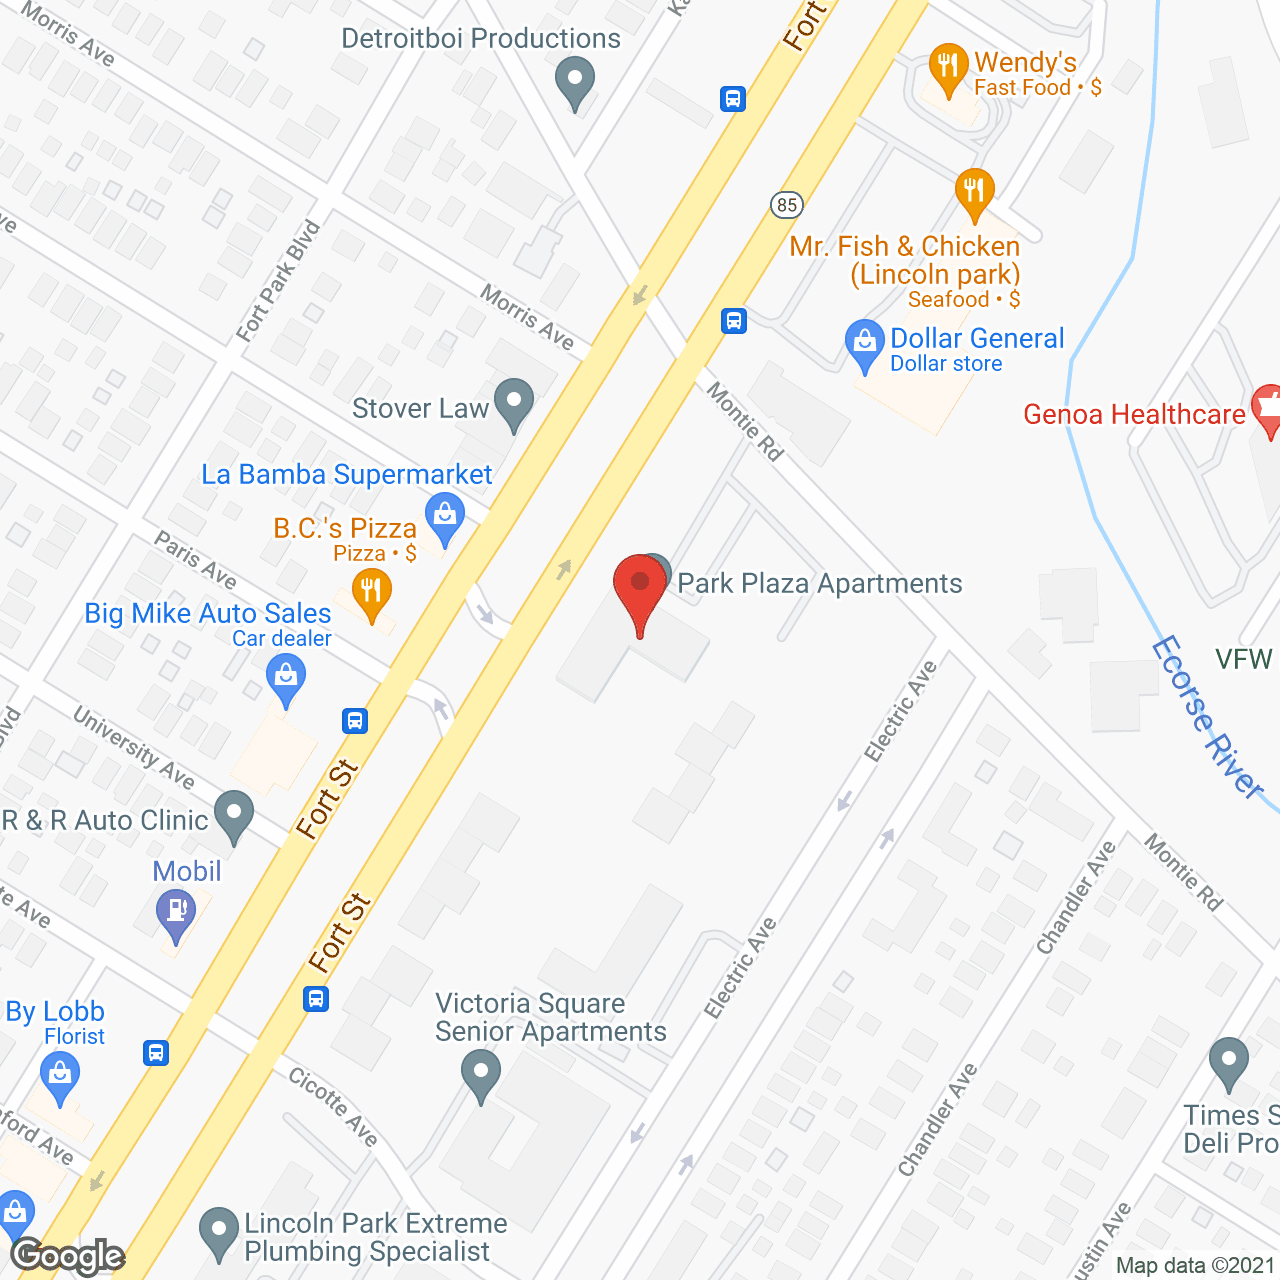 Park Plaza Apartments in google map